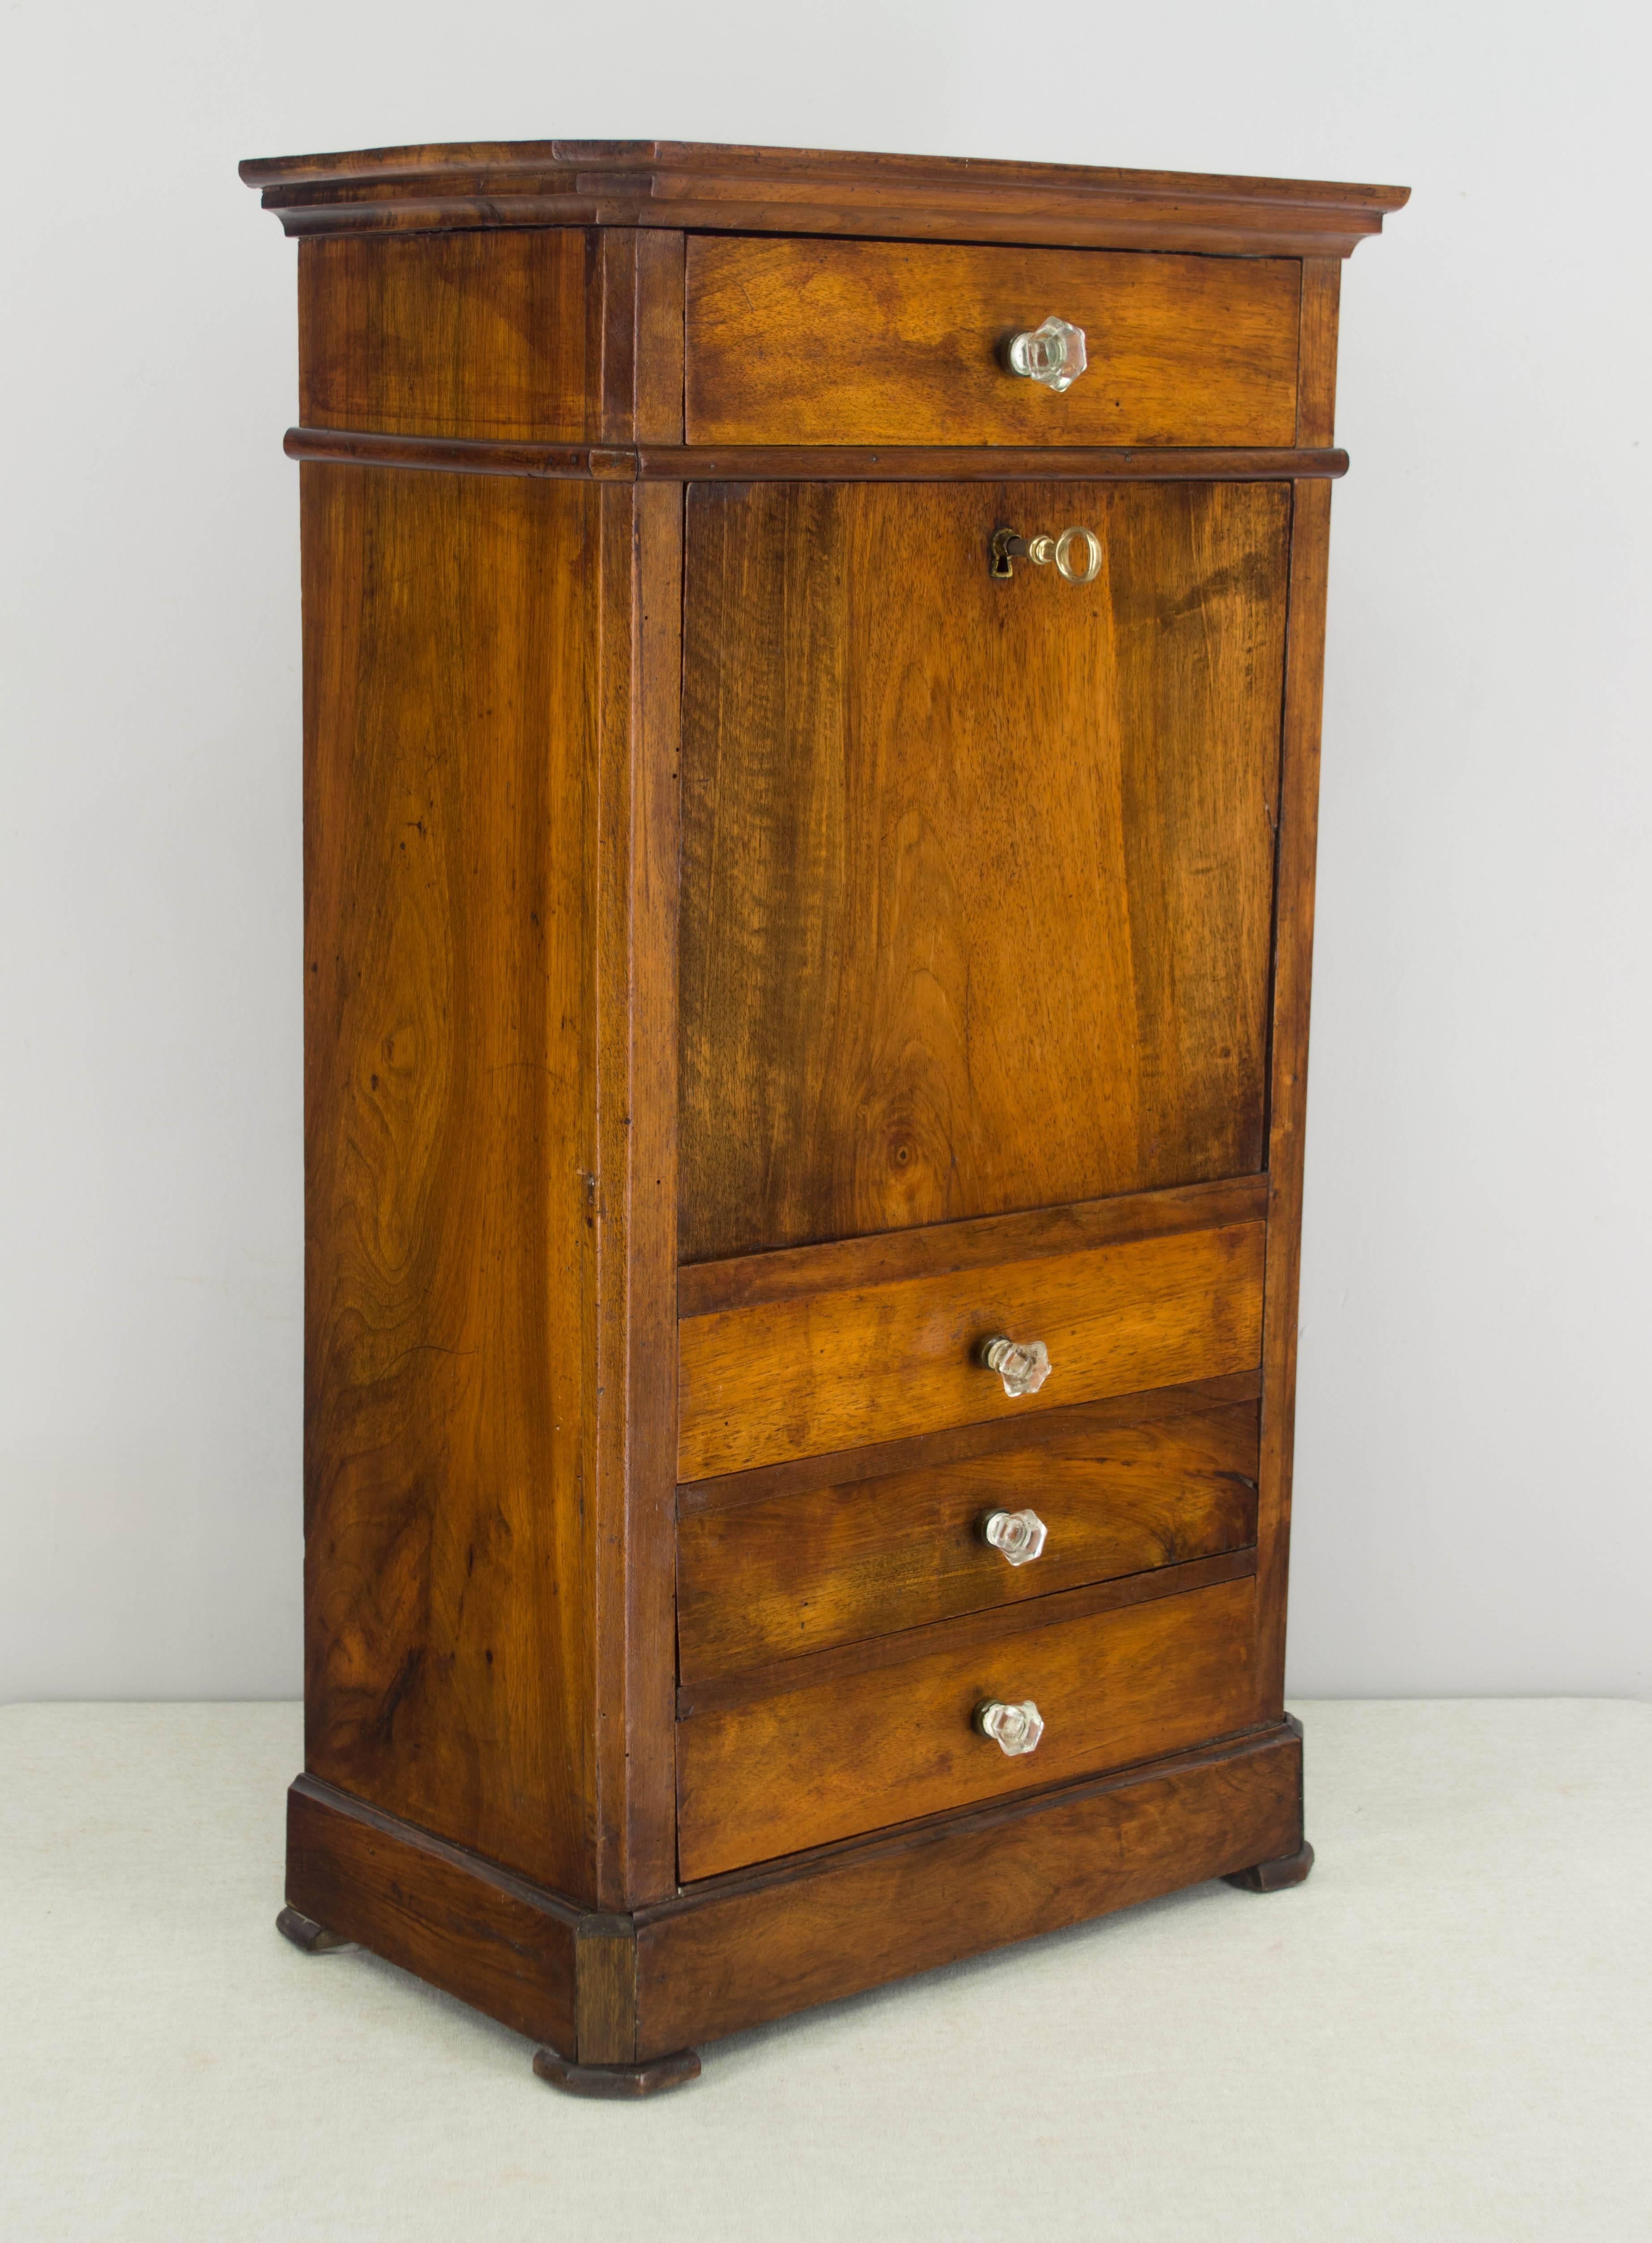 19th century Louis Philippe period miniature secretaire a abbattant made of solid walnut with French polish finish. Three dovetailed drawers with glass knobs and a pull down 